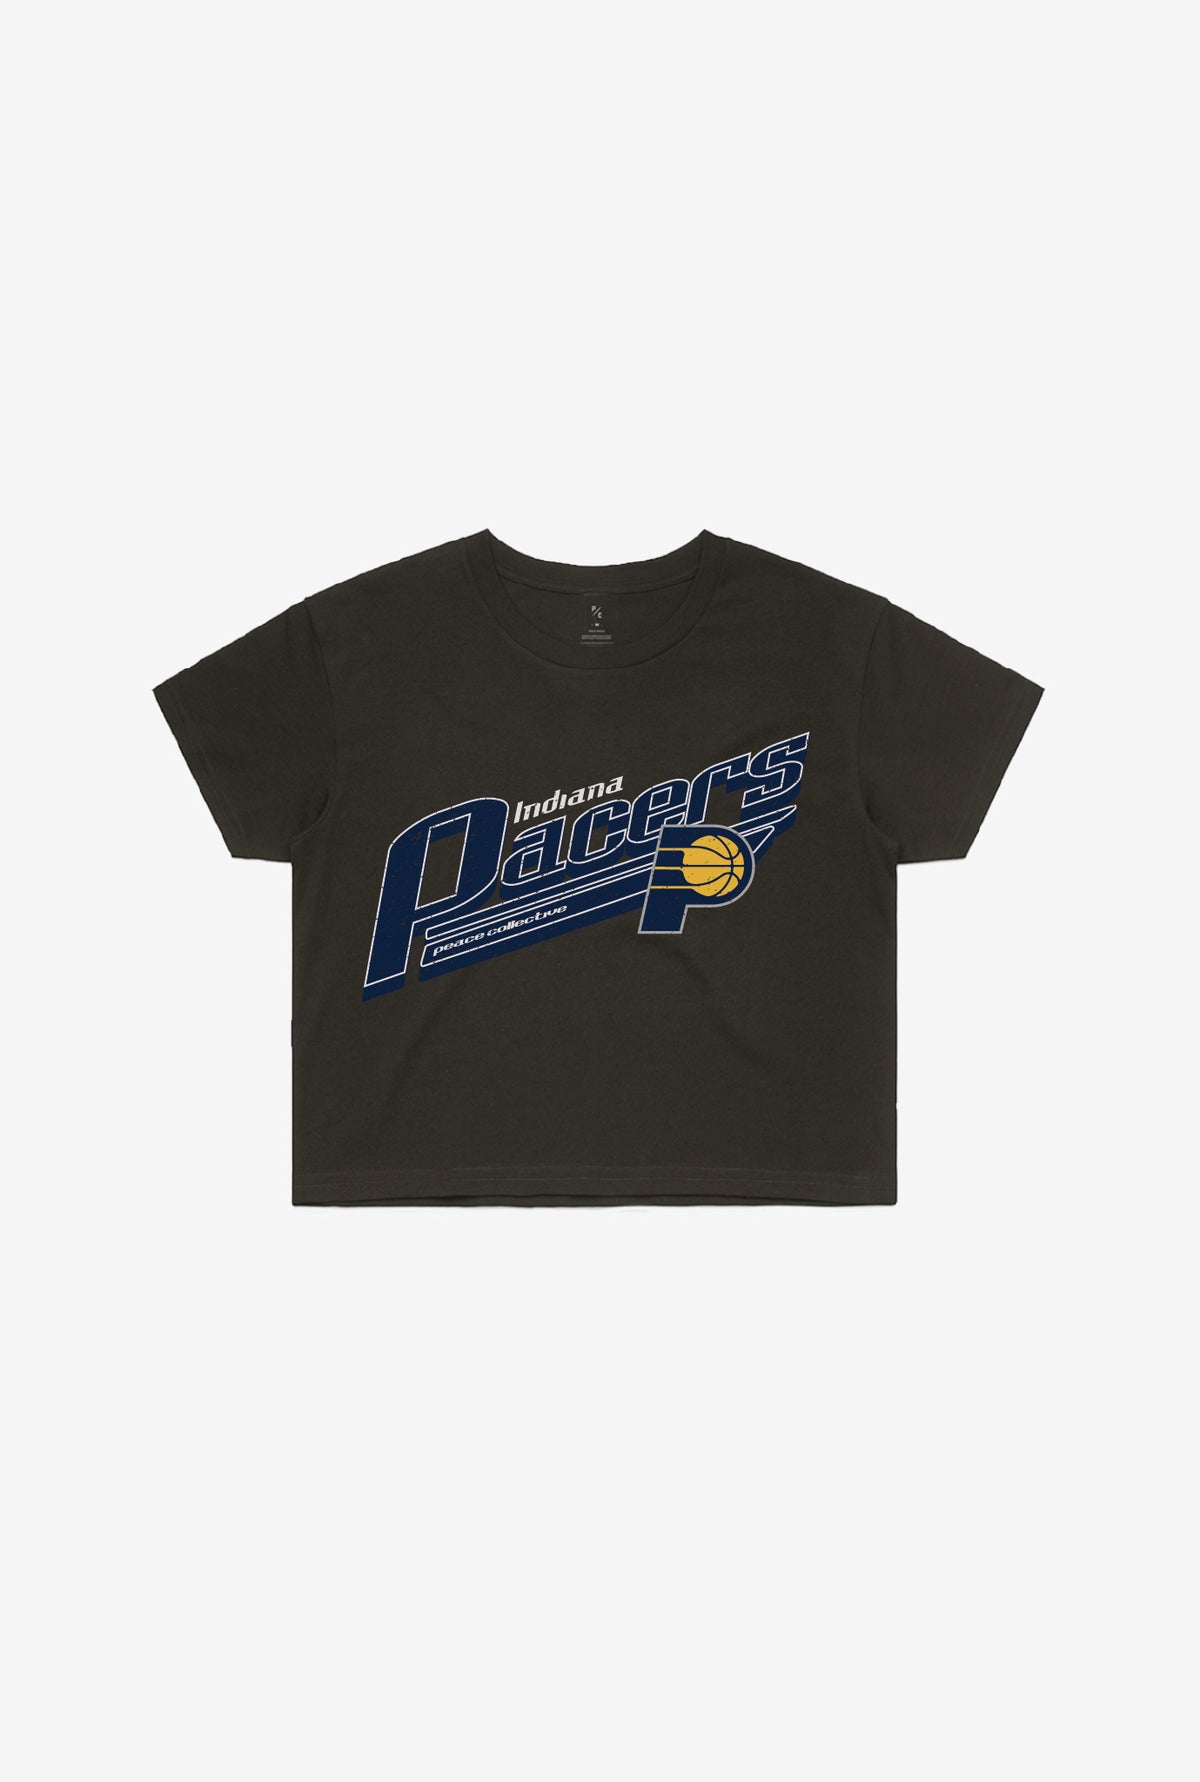 Indiana Pacers Pigment Dye Cropped T-Shirt - Black